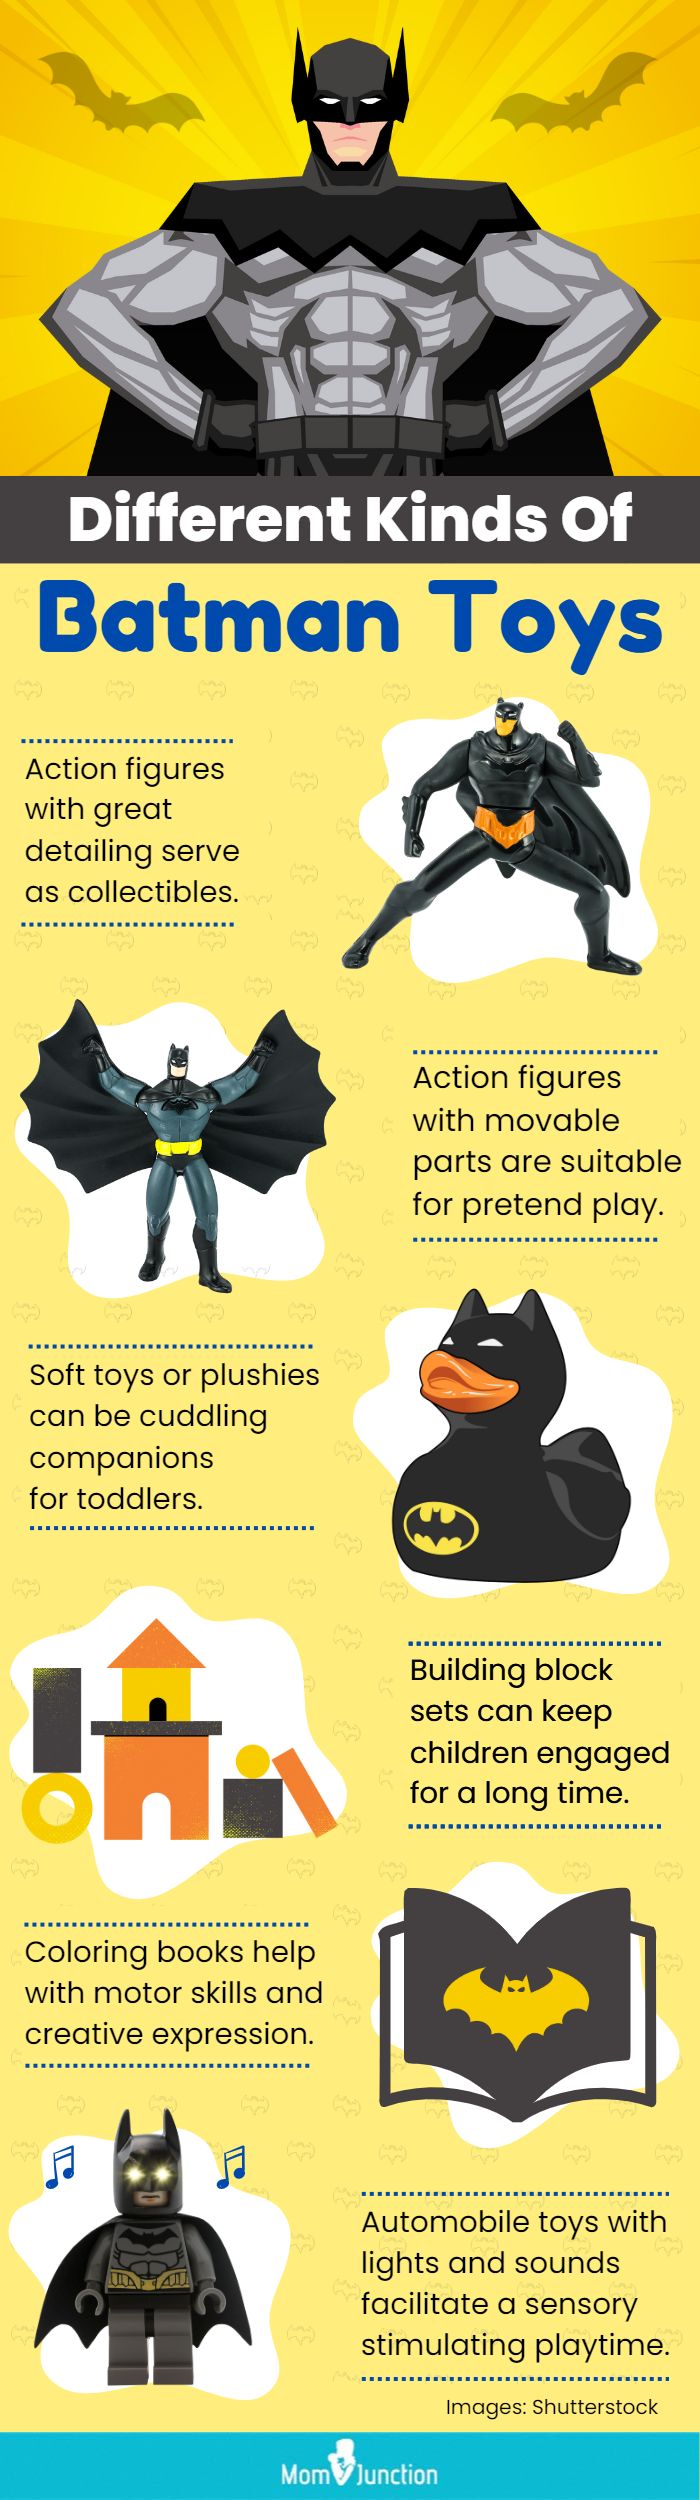 Different Kinds Of Batman Toys (infographic)